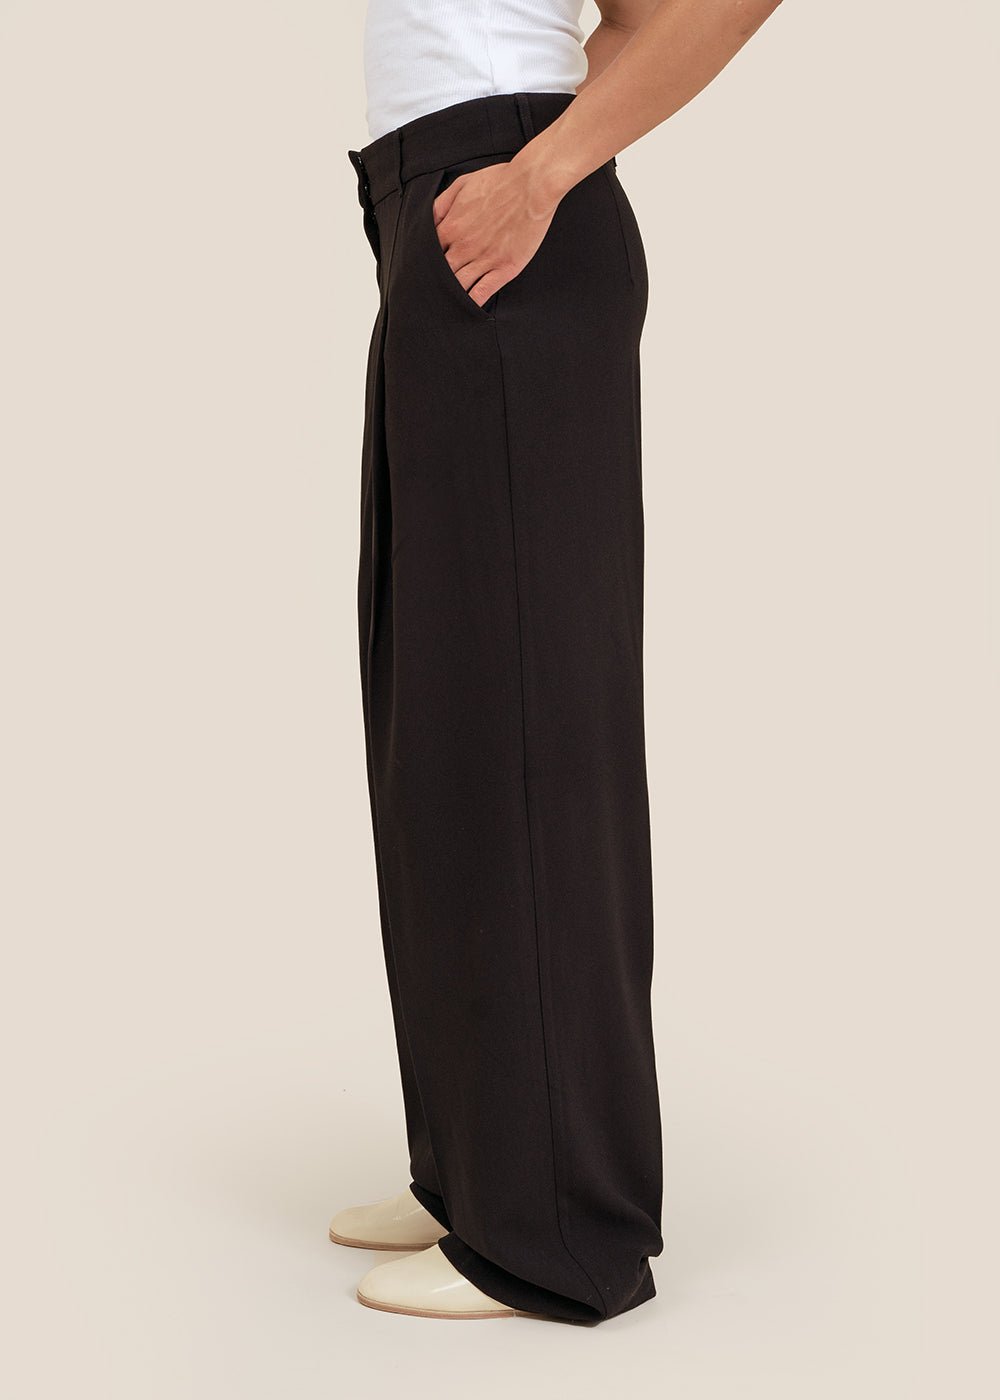 Brunella Trousers in Black by STYLEIN – New Classics Studios